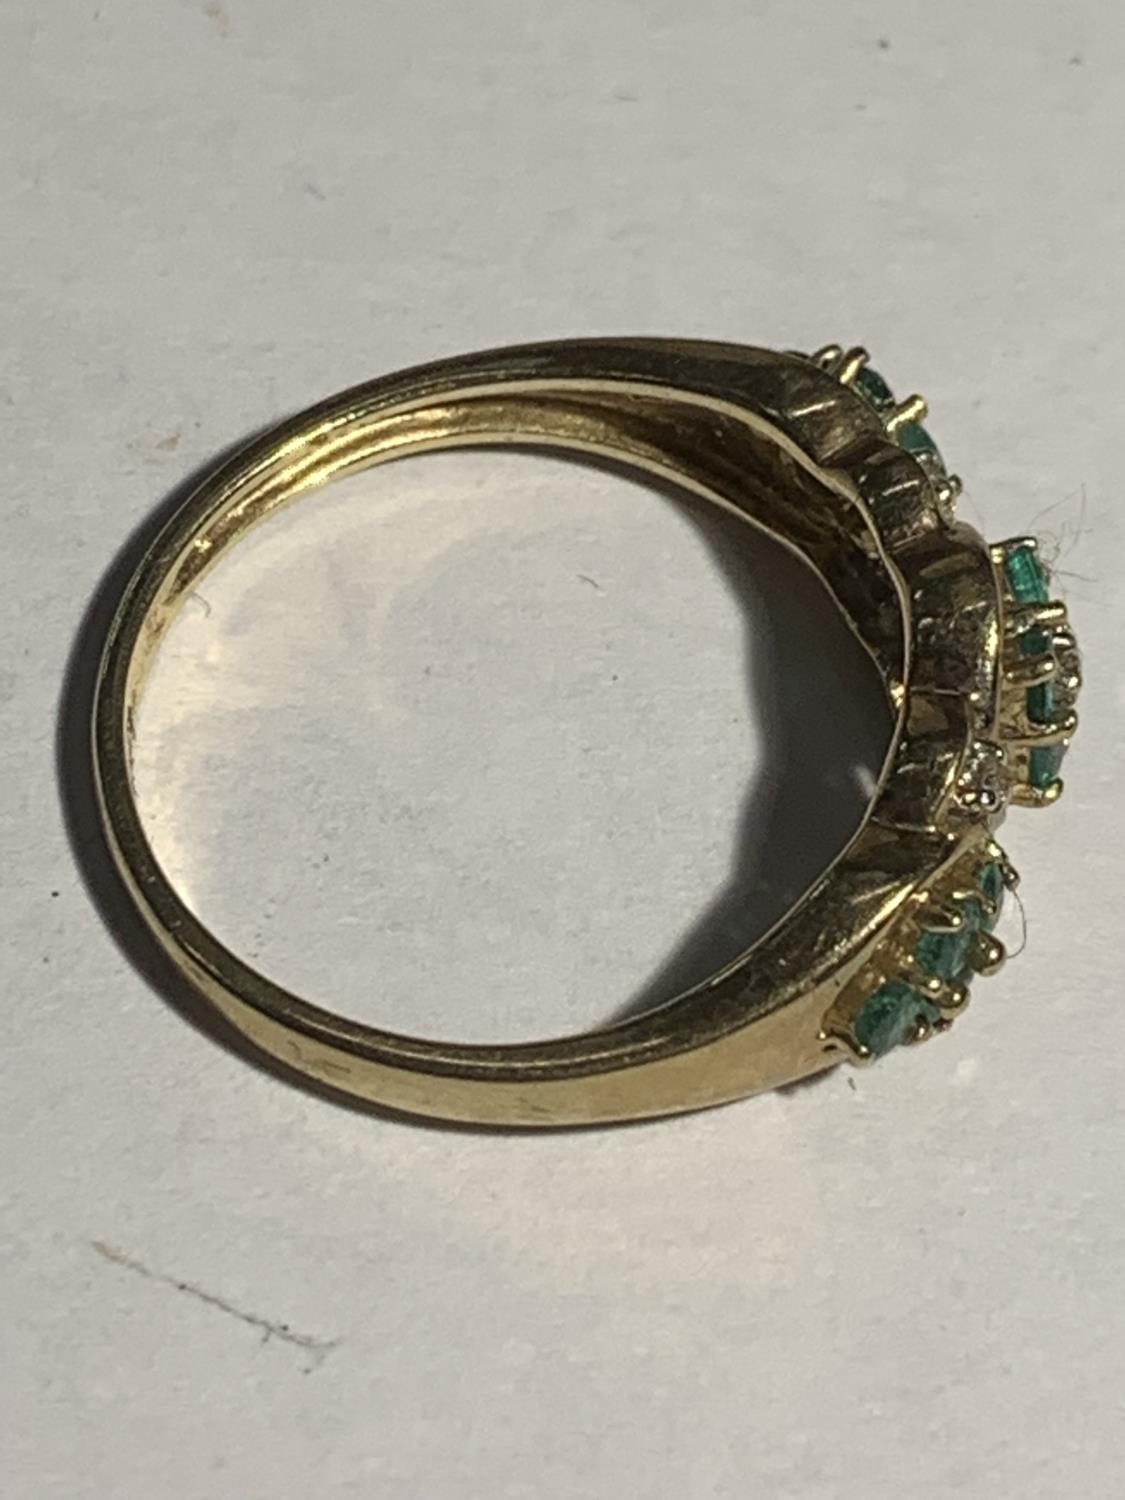 A 9 CARAT GOLD RING WITH GREEN AND CLEAR STONES IN A FLOWER DESIGN SIZE S GROSS WEIGHT 2.7 GRAMS - Image 4 of 5